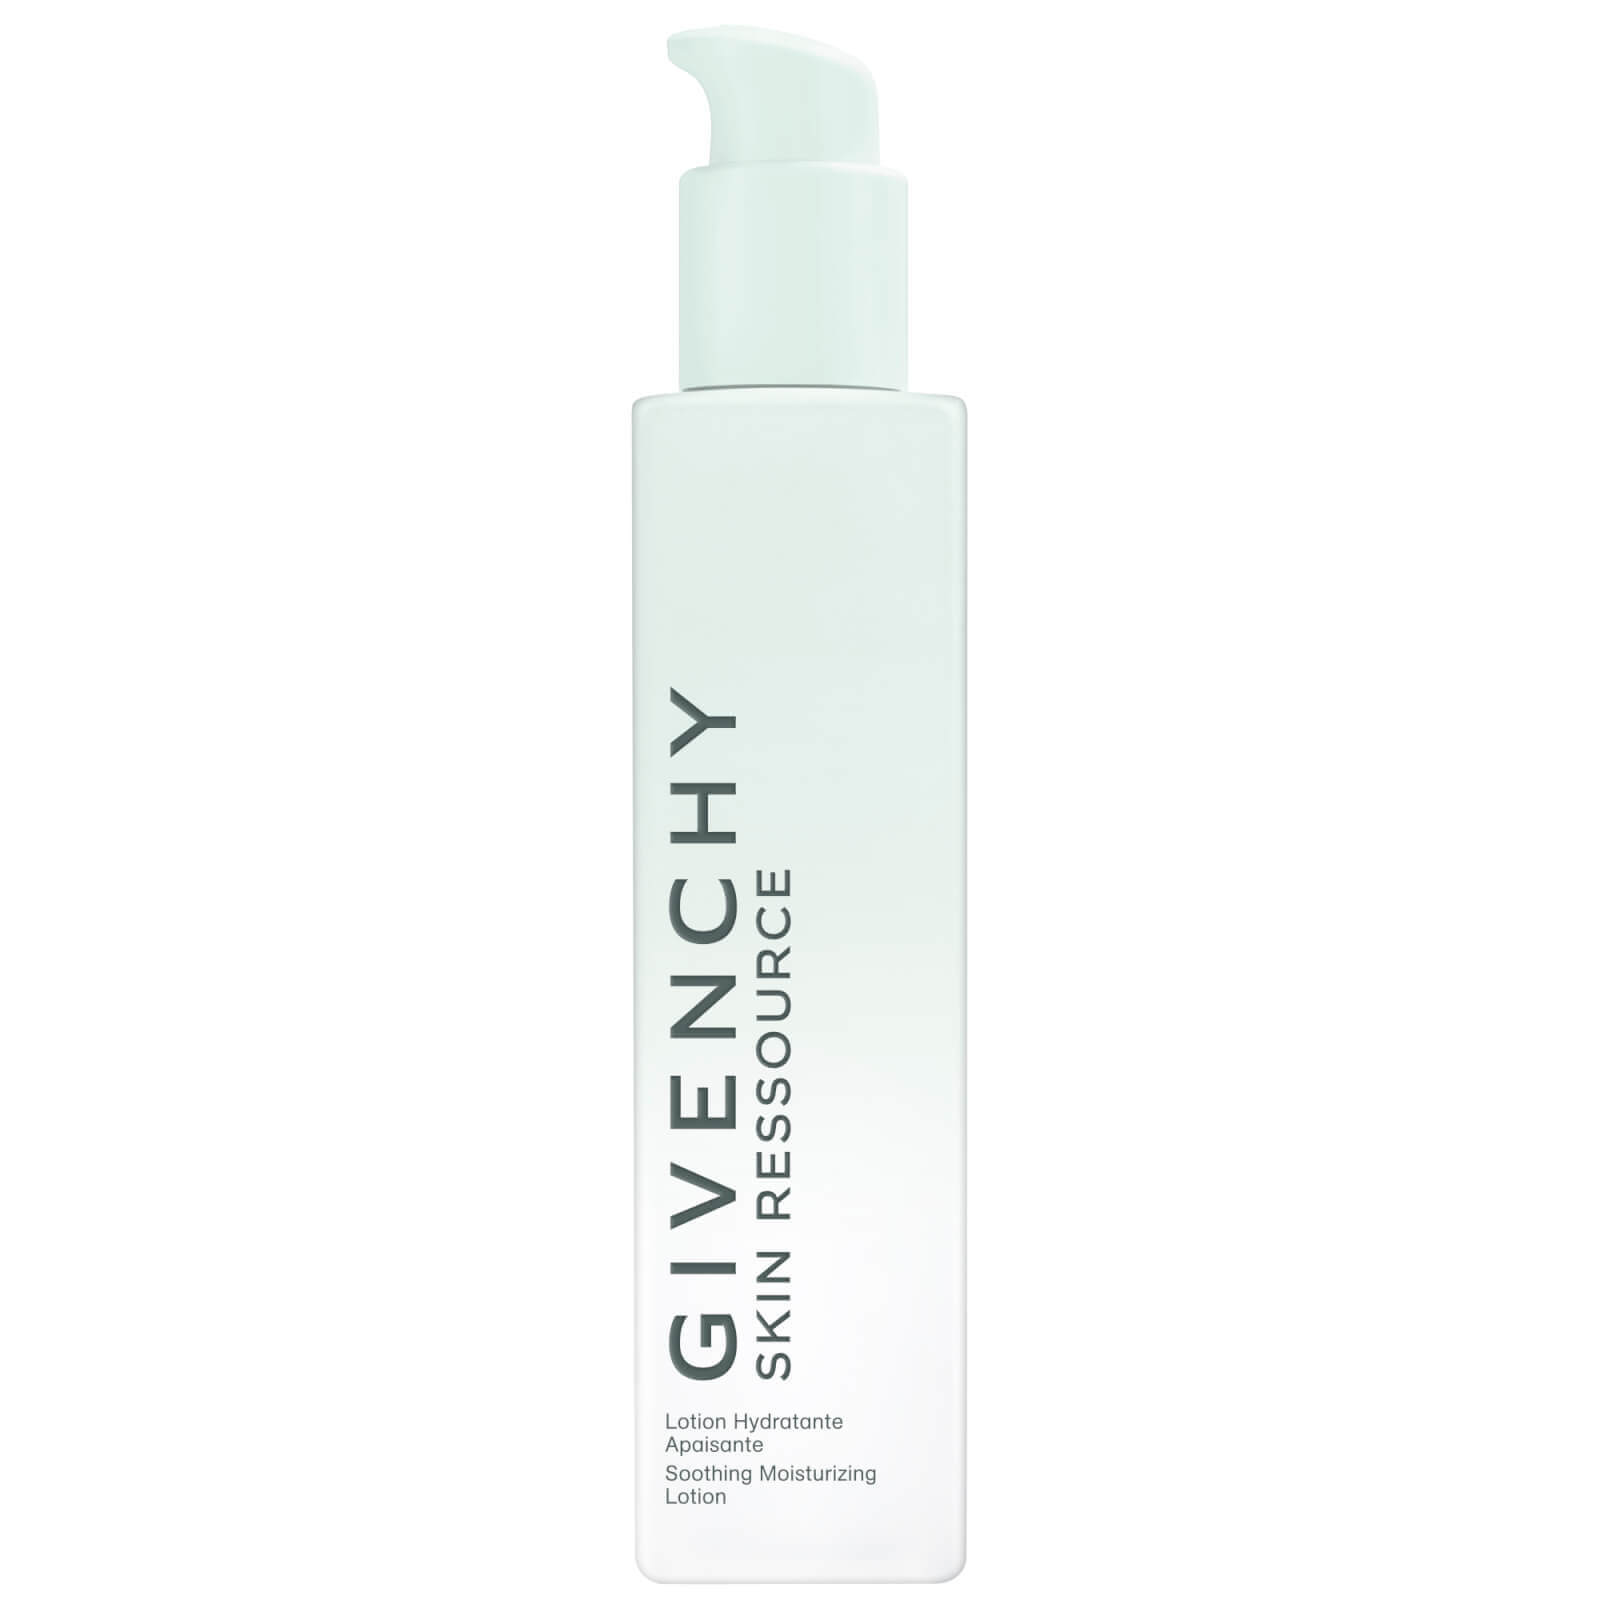 Photos - Cream / Lotion Givenchy Skin Ressource Soothing Lotion 200ml P056237 